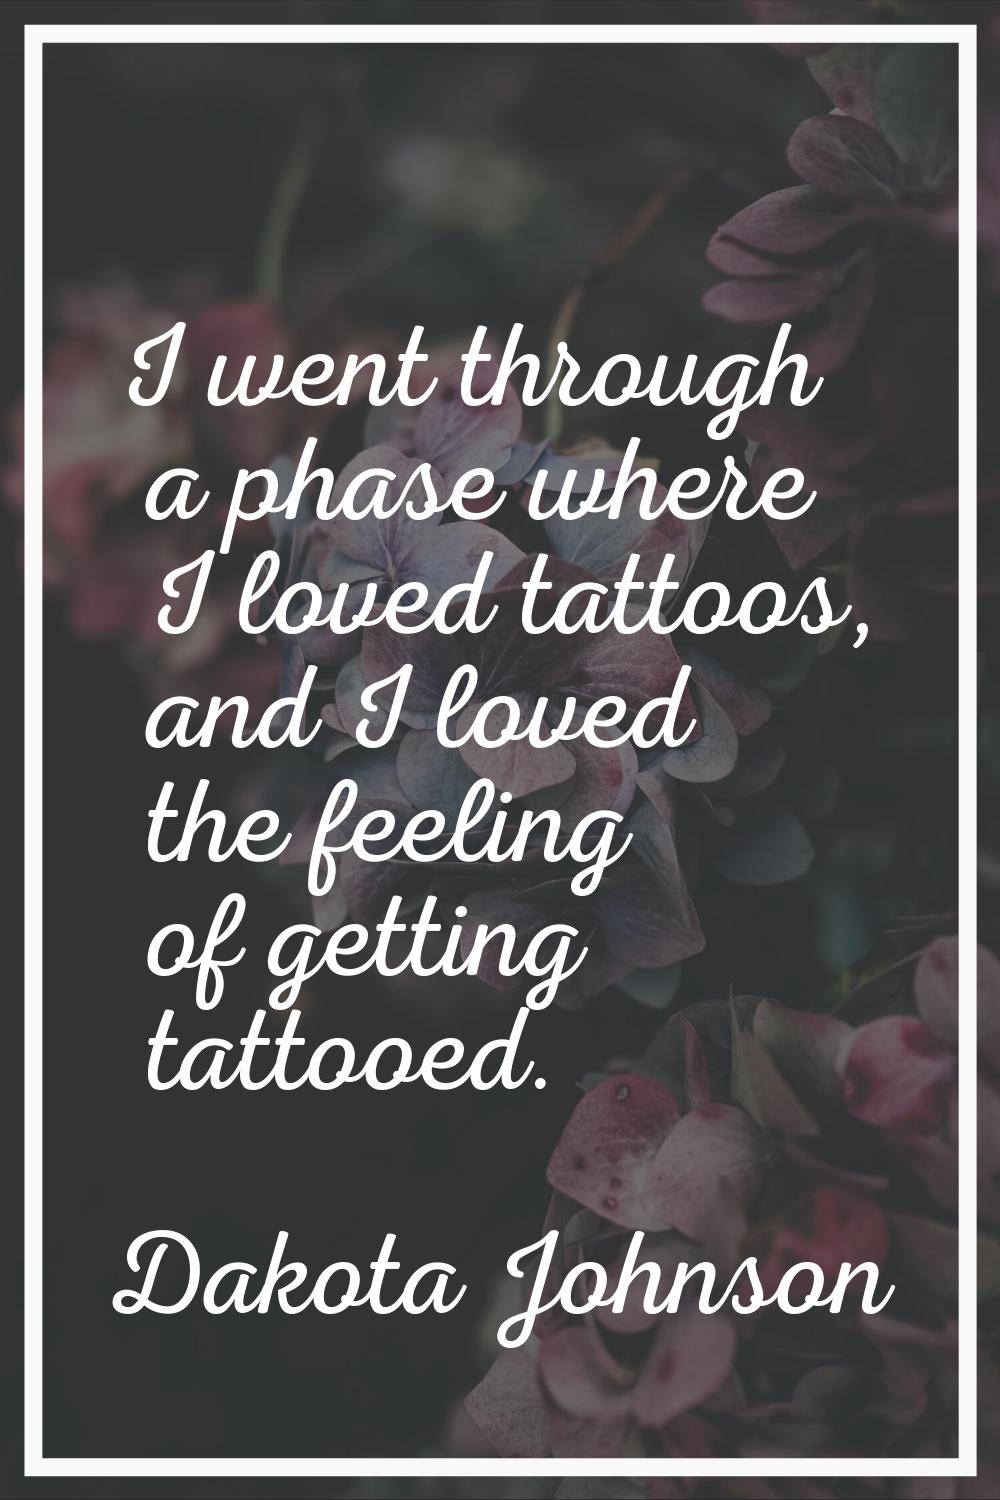 I went through a phase where I loved tattoos, and I loved the feeling of getting tattooed.